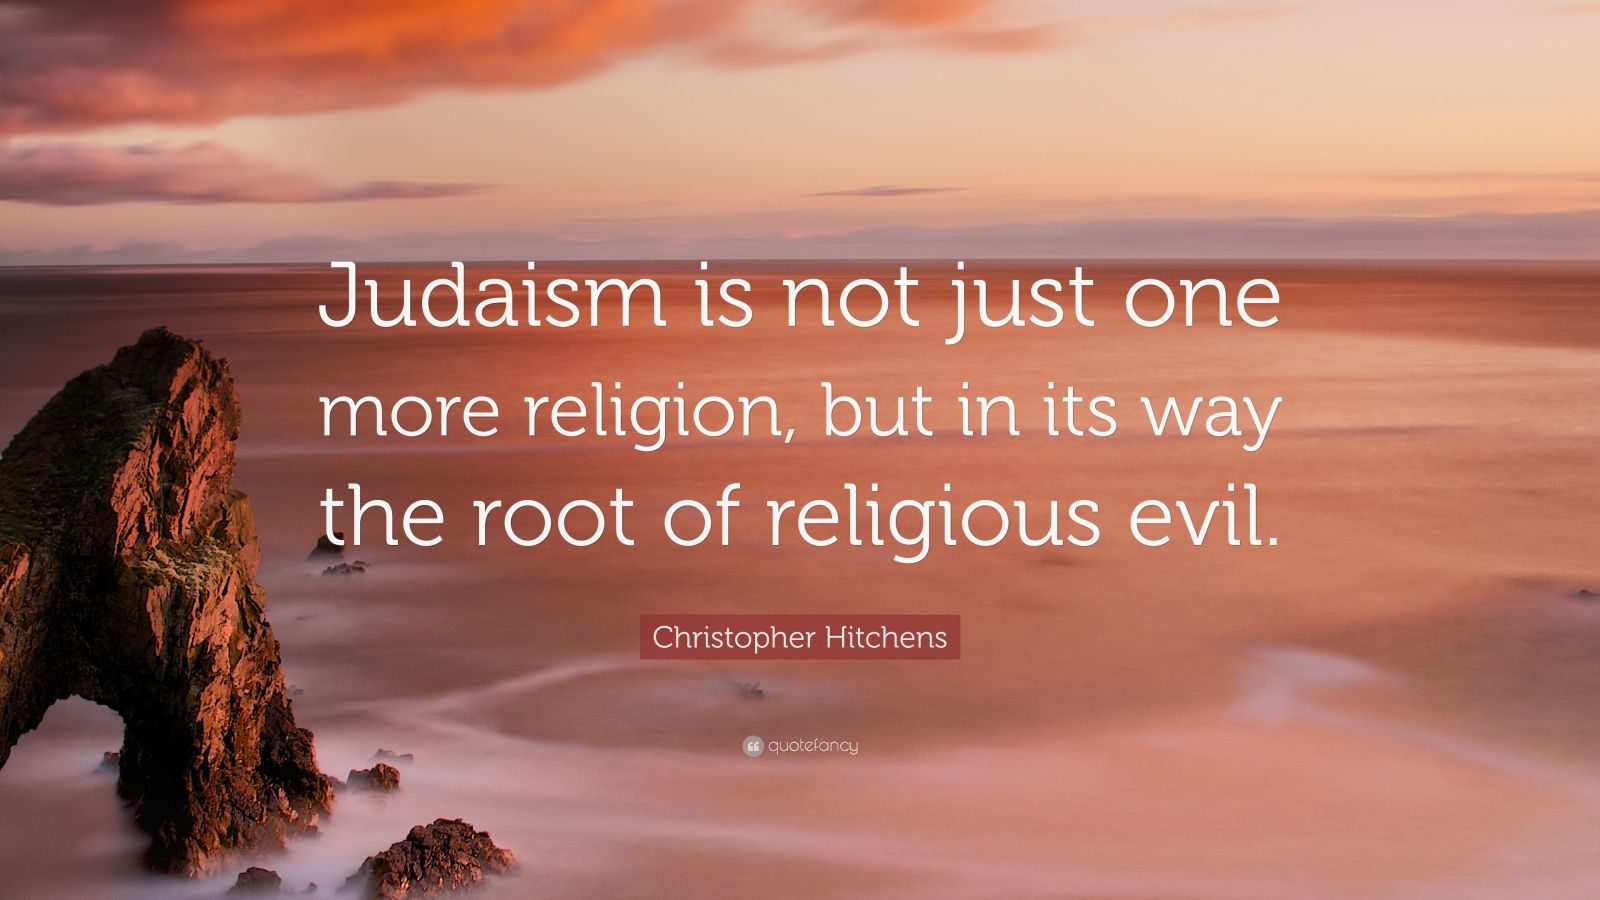 Christopher Hitchens Quote: “Judaism is not just one more religion, but ...